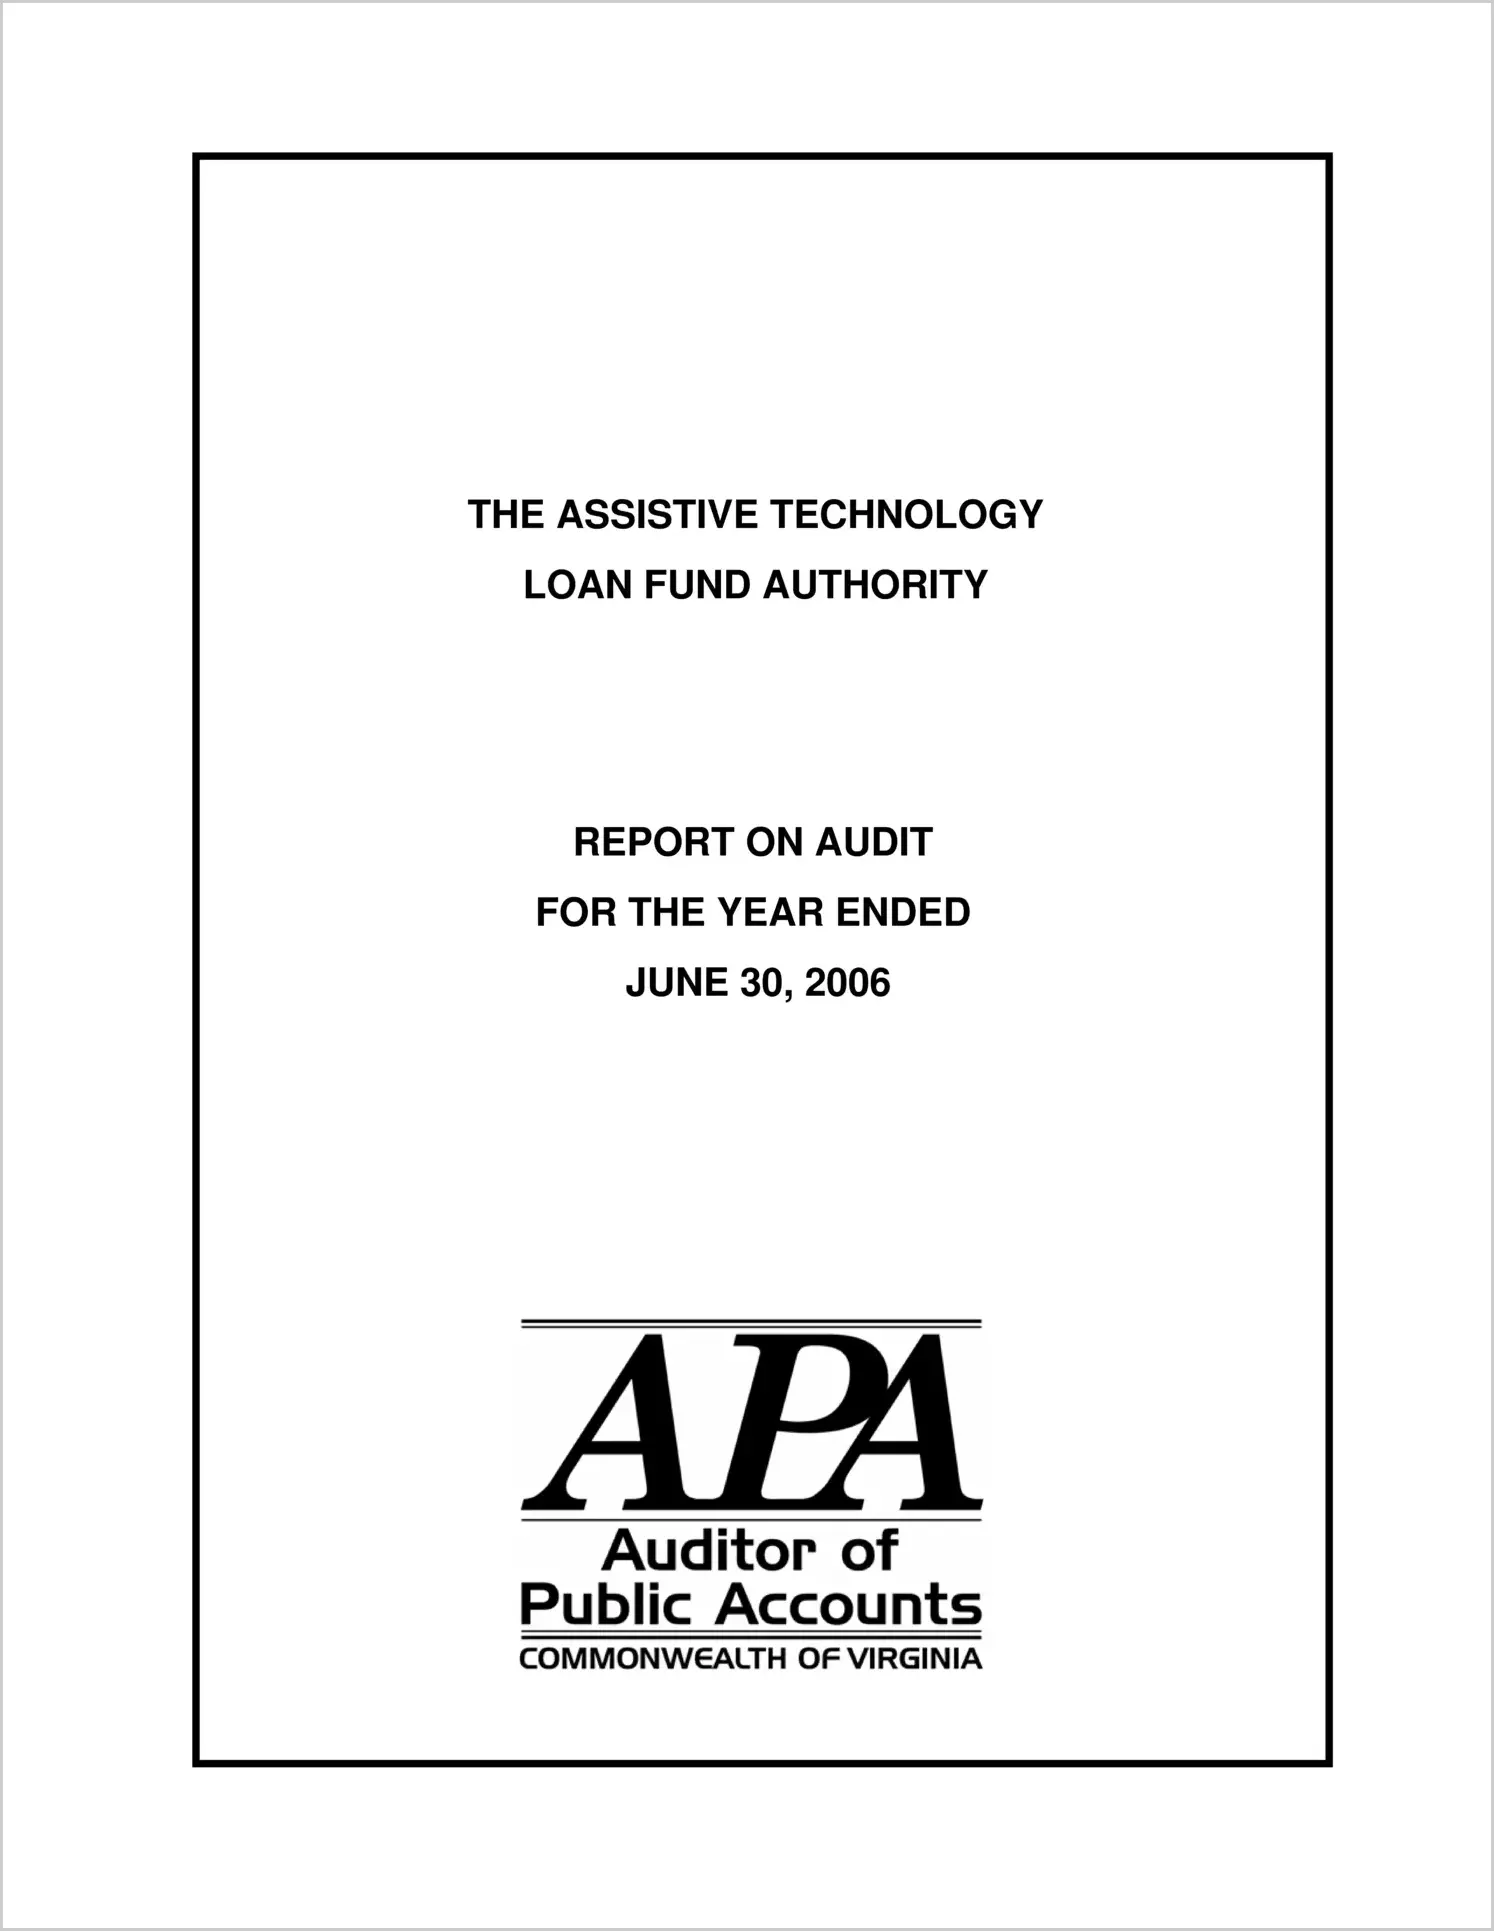 Assistive Technology Loan Fund Authority For the Year Ended June 30, 2006